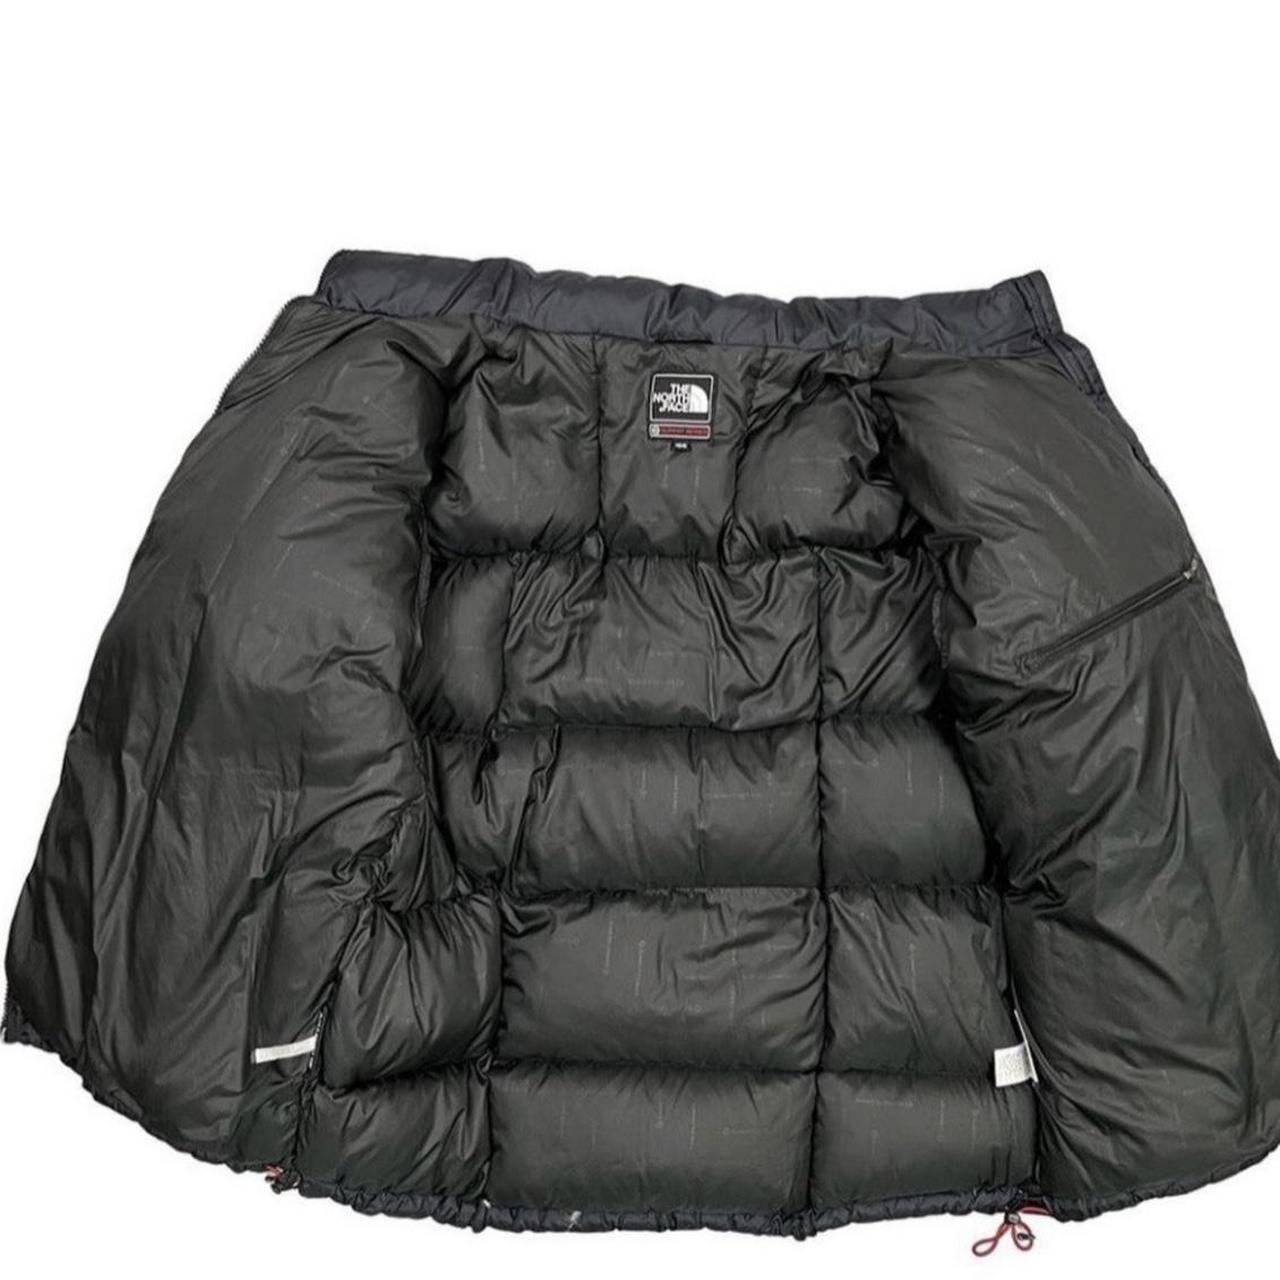 The North Face Men's Blue and Black Jacket (3)